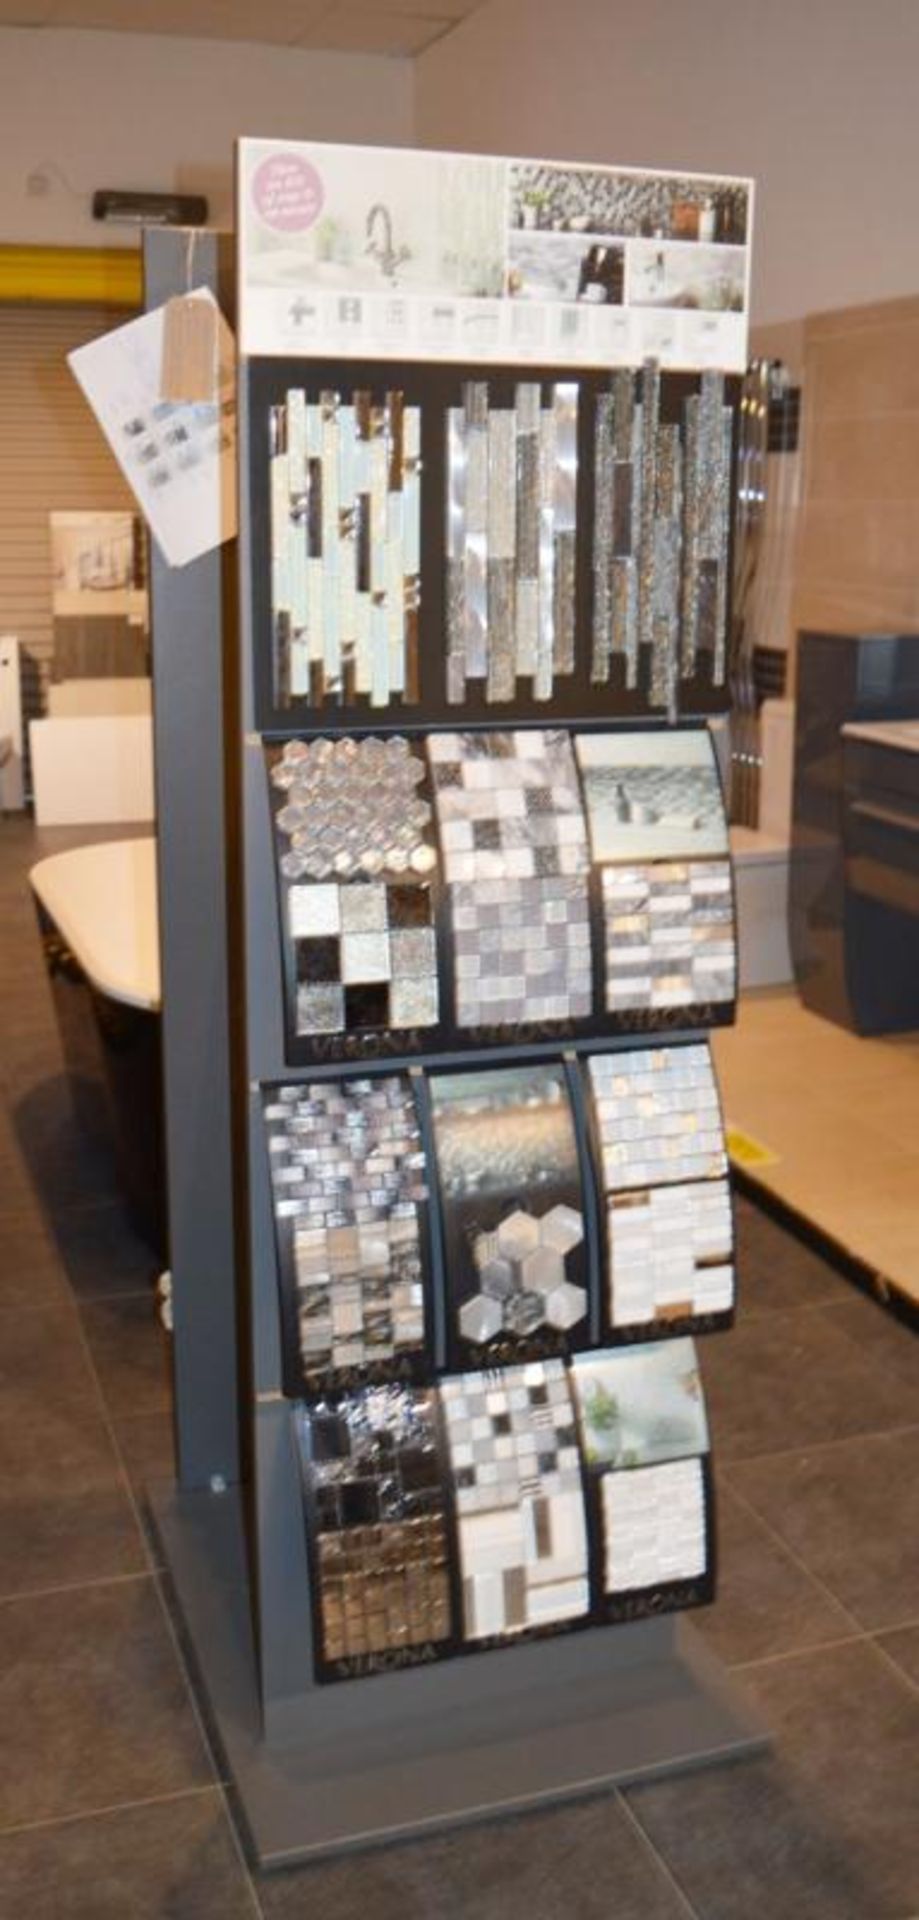 1 x Verona Tile Display Unit With Sample Stock - H184 x W84 x D65 cms - CL406 - Ref H226 - Ex - Image 11 of 11